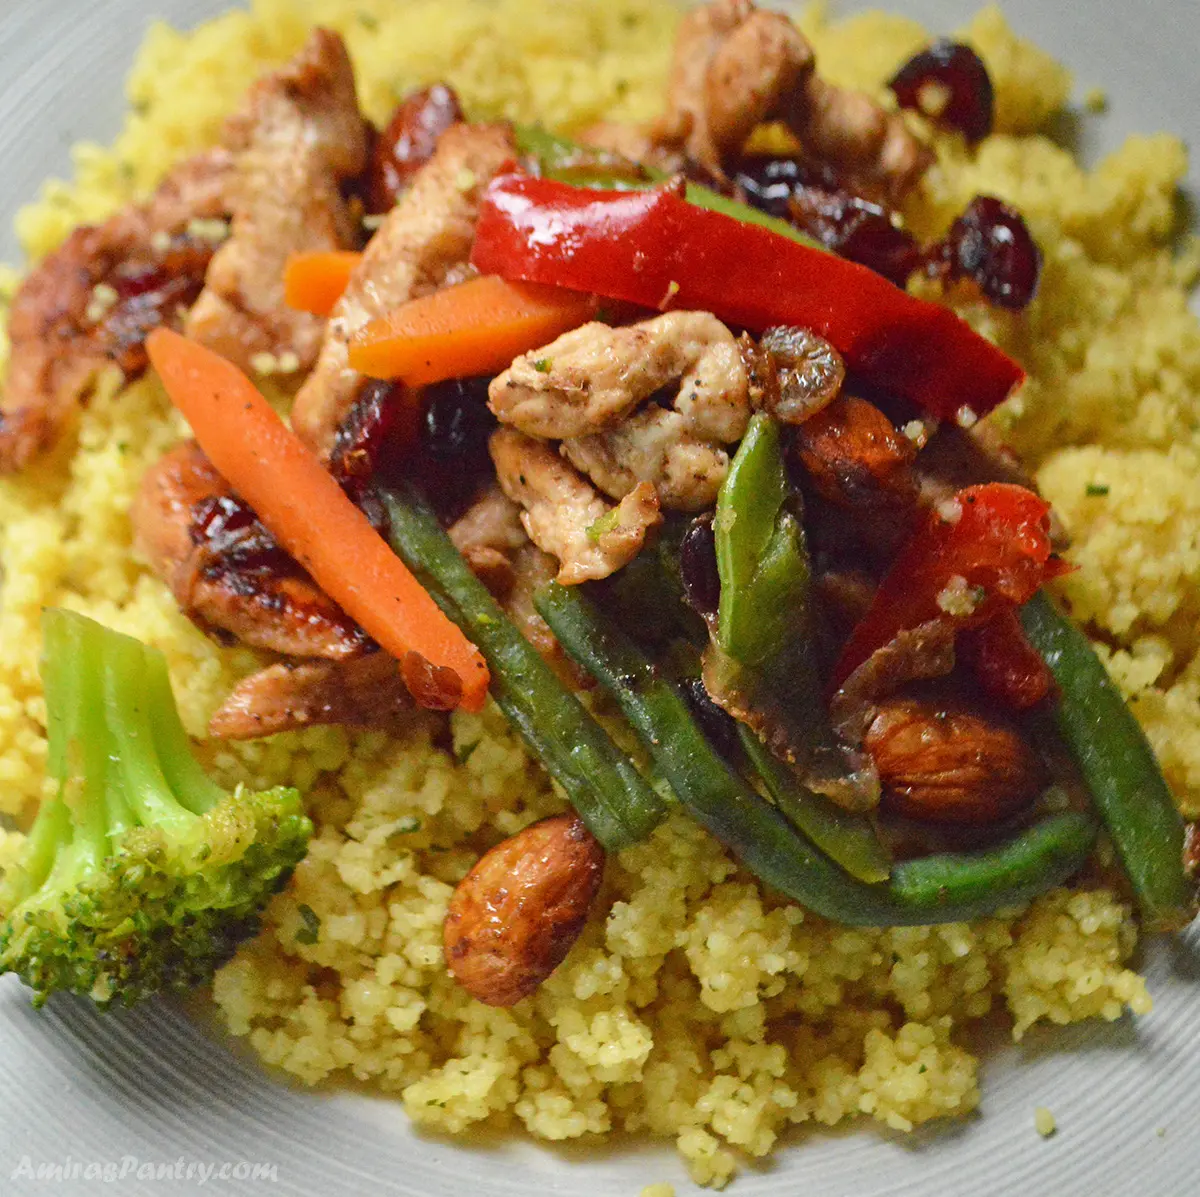 A close up look at a dish with yellow couscous, chicken and vegetables.